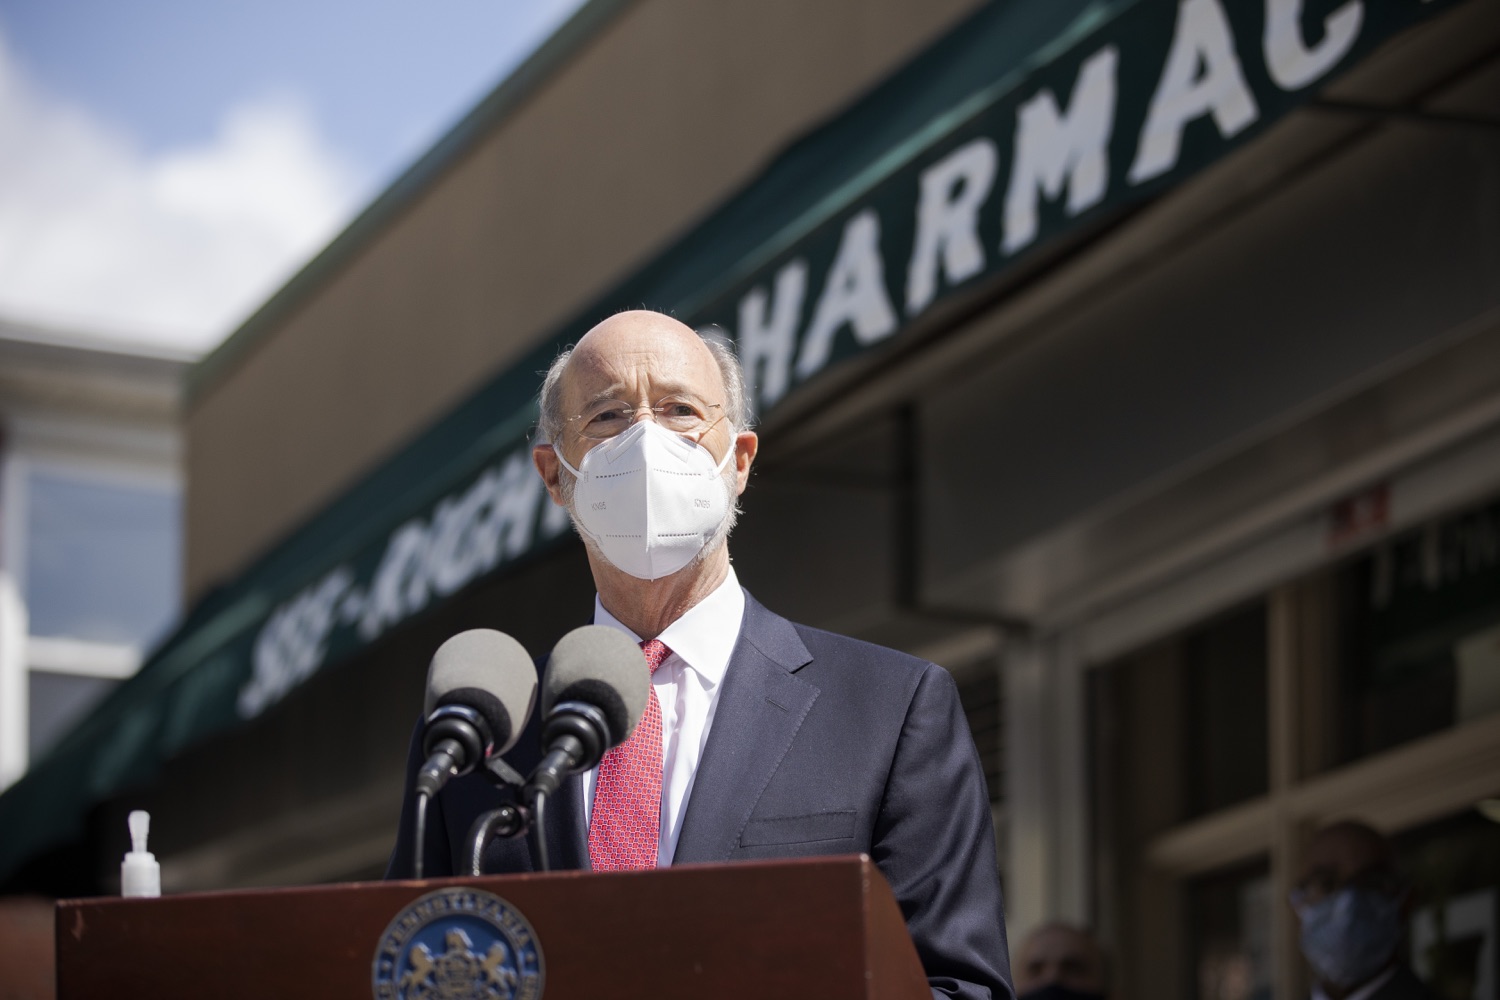 Pennsylvania Governor Tom Wolf speaking with the press.  Governor Tom Wolf today visited See-Right Pharmacy in Harrisburg to learn more about how the local, neighborhood pharmacy is vaccinating community members and to talk about COVID-19 vaccine hesitancy in Pennsylvania. Harrisburg, PA  April 22, 2021<br><a href="https://filesource.amperwave.net/commonwealthofpa/photo/18704_gov_seeRight_dz_006.jpg" target="_blank">⇣ Download Photo</a>